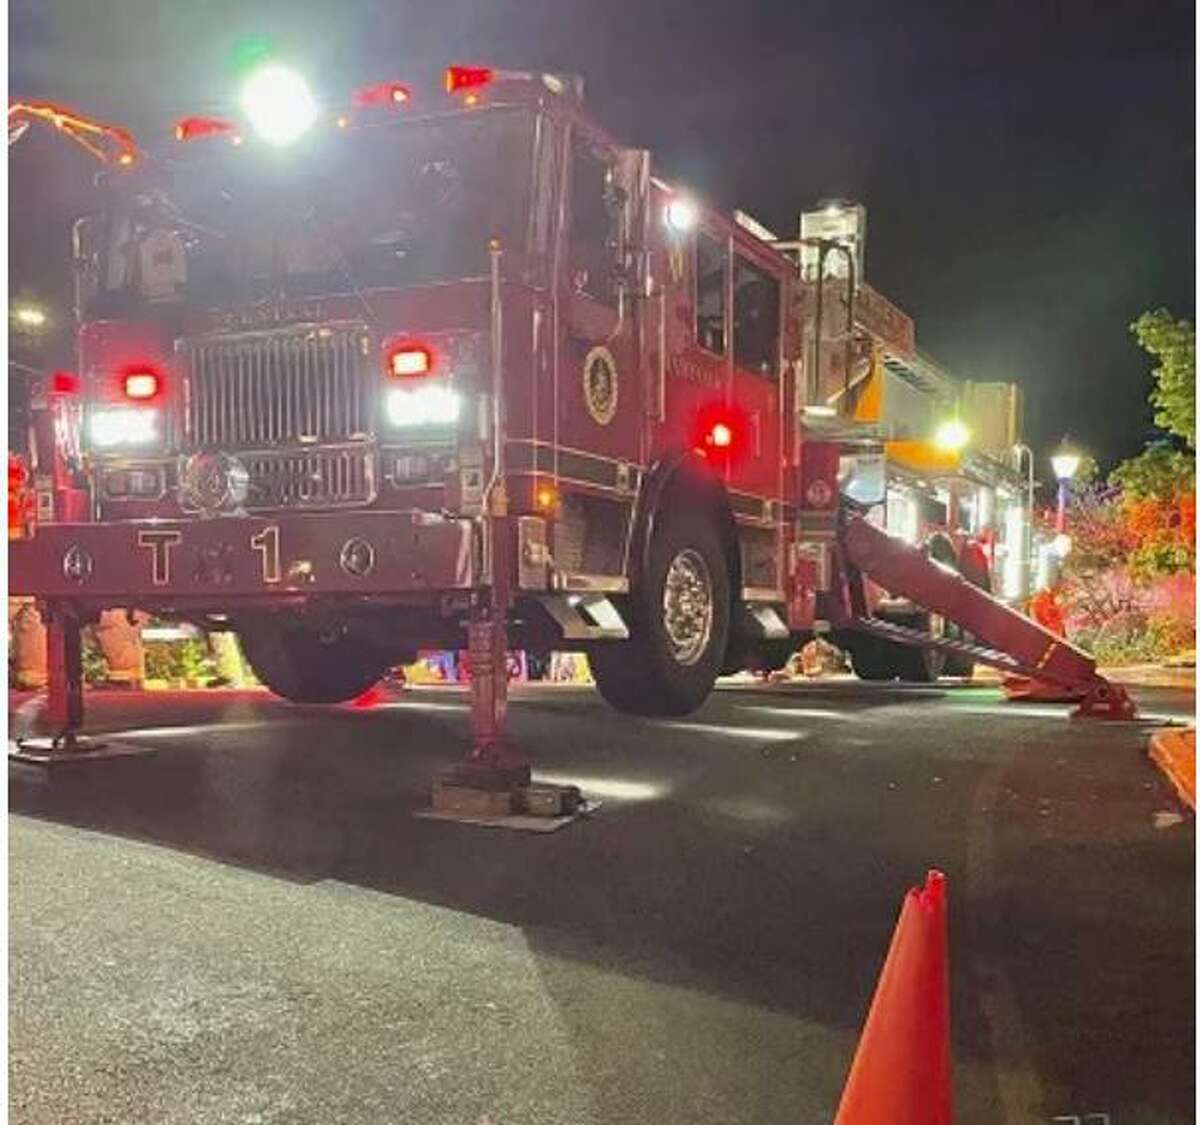 Firefighters in Stamford, Conn. put out a fire at a 12-story apartment building that started Monday, May 23, 2022. One firefighter was injured during the incident, a fire official said.